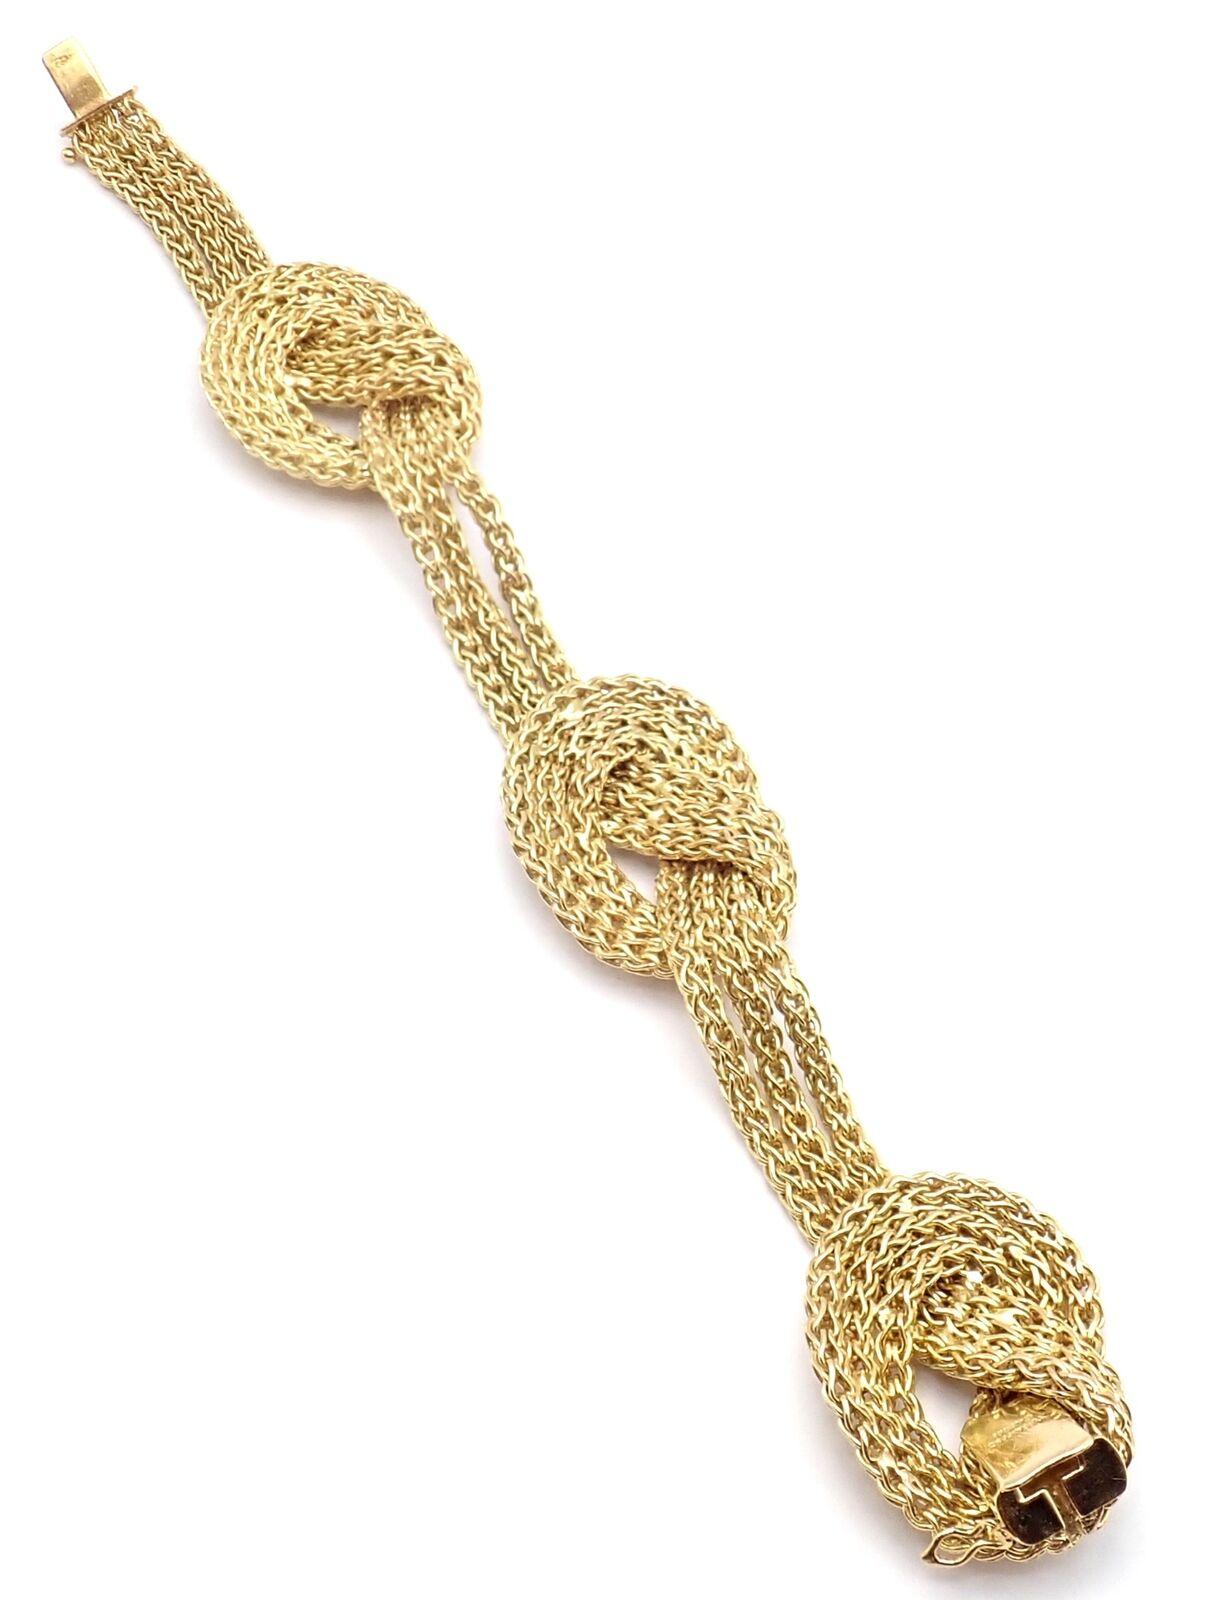 Vintage Tiffany & Co Woven Knot Yellow Gold Link Bracelet In Excellent Condition For Sale In Holland, PA